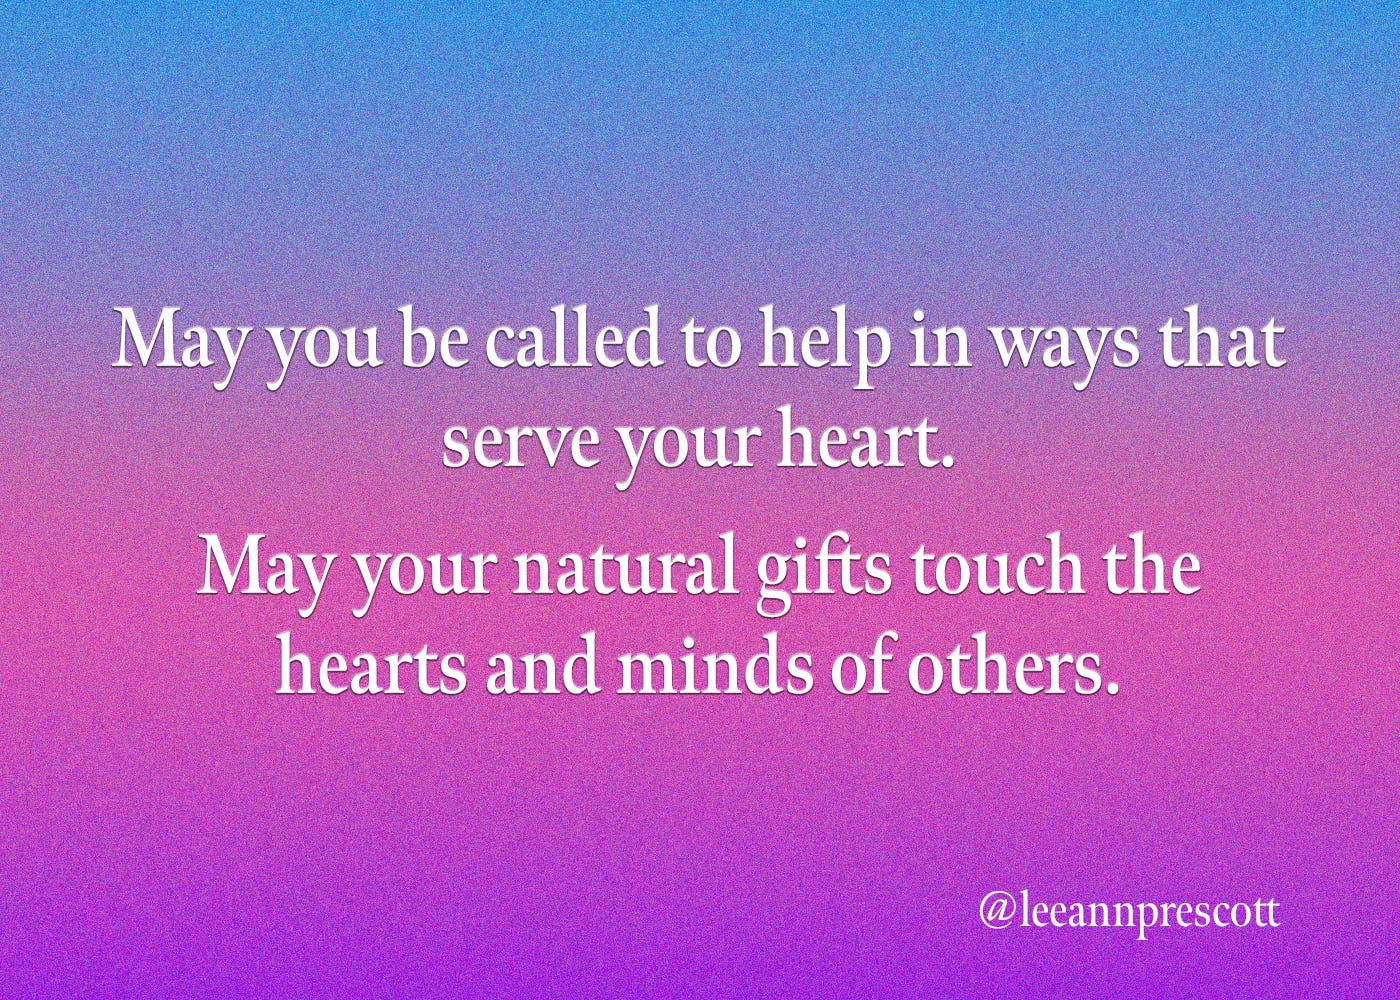 May you be called to help in ways that serve your heart